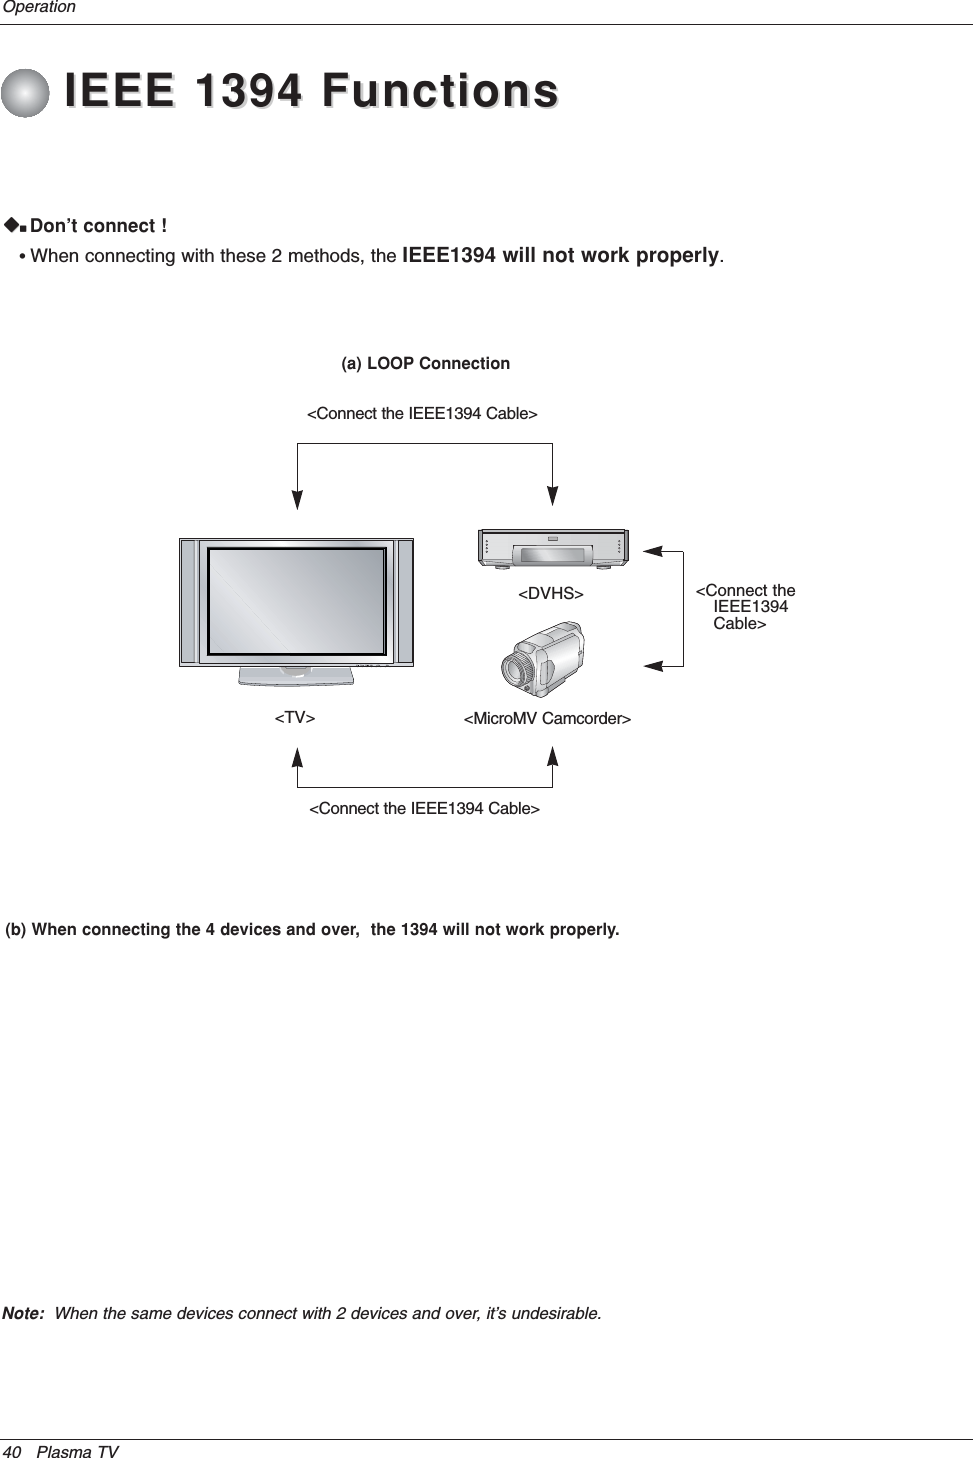 40 Plasma TVOperationWWVDon’t connect !•When connecting with these 2 methods, the IEEE1394 will not work properly.(a) LOOP Connection&lt;Connect the IEEE1394 Cable&gt;&lt;TV&gt;&lt;DVHS&gt;&lt;MicroMV Camcorder&gt;&lt;Connect the IEEE1394 Cable&gt;&lt;Connect theIEEE1394Cable&gt;(b) When connecting the 4 devices and over,  the 1394 will not work properly. Note: When the same devices connect with 2 devices and over, it’s undesirable.IEEE 1394 FunctionsIEEE 1394 Functions